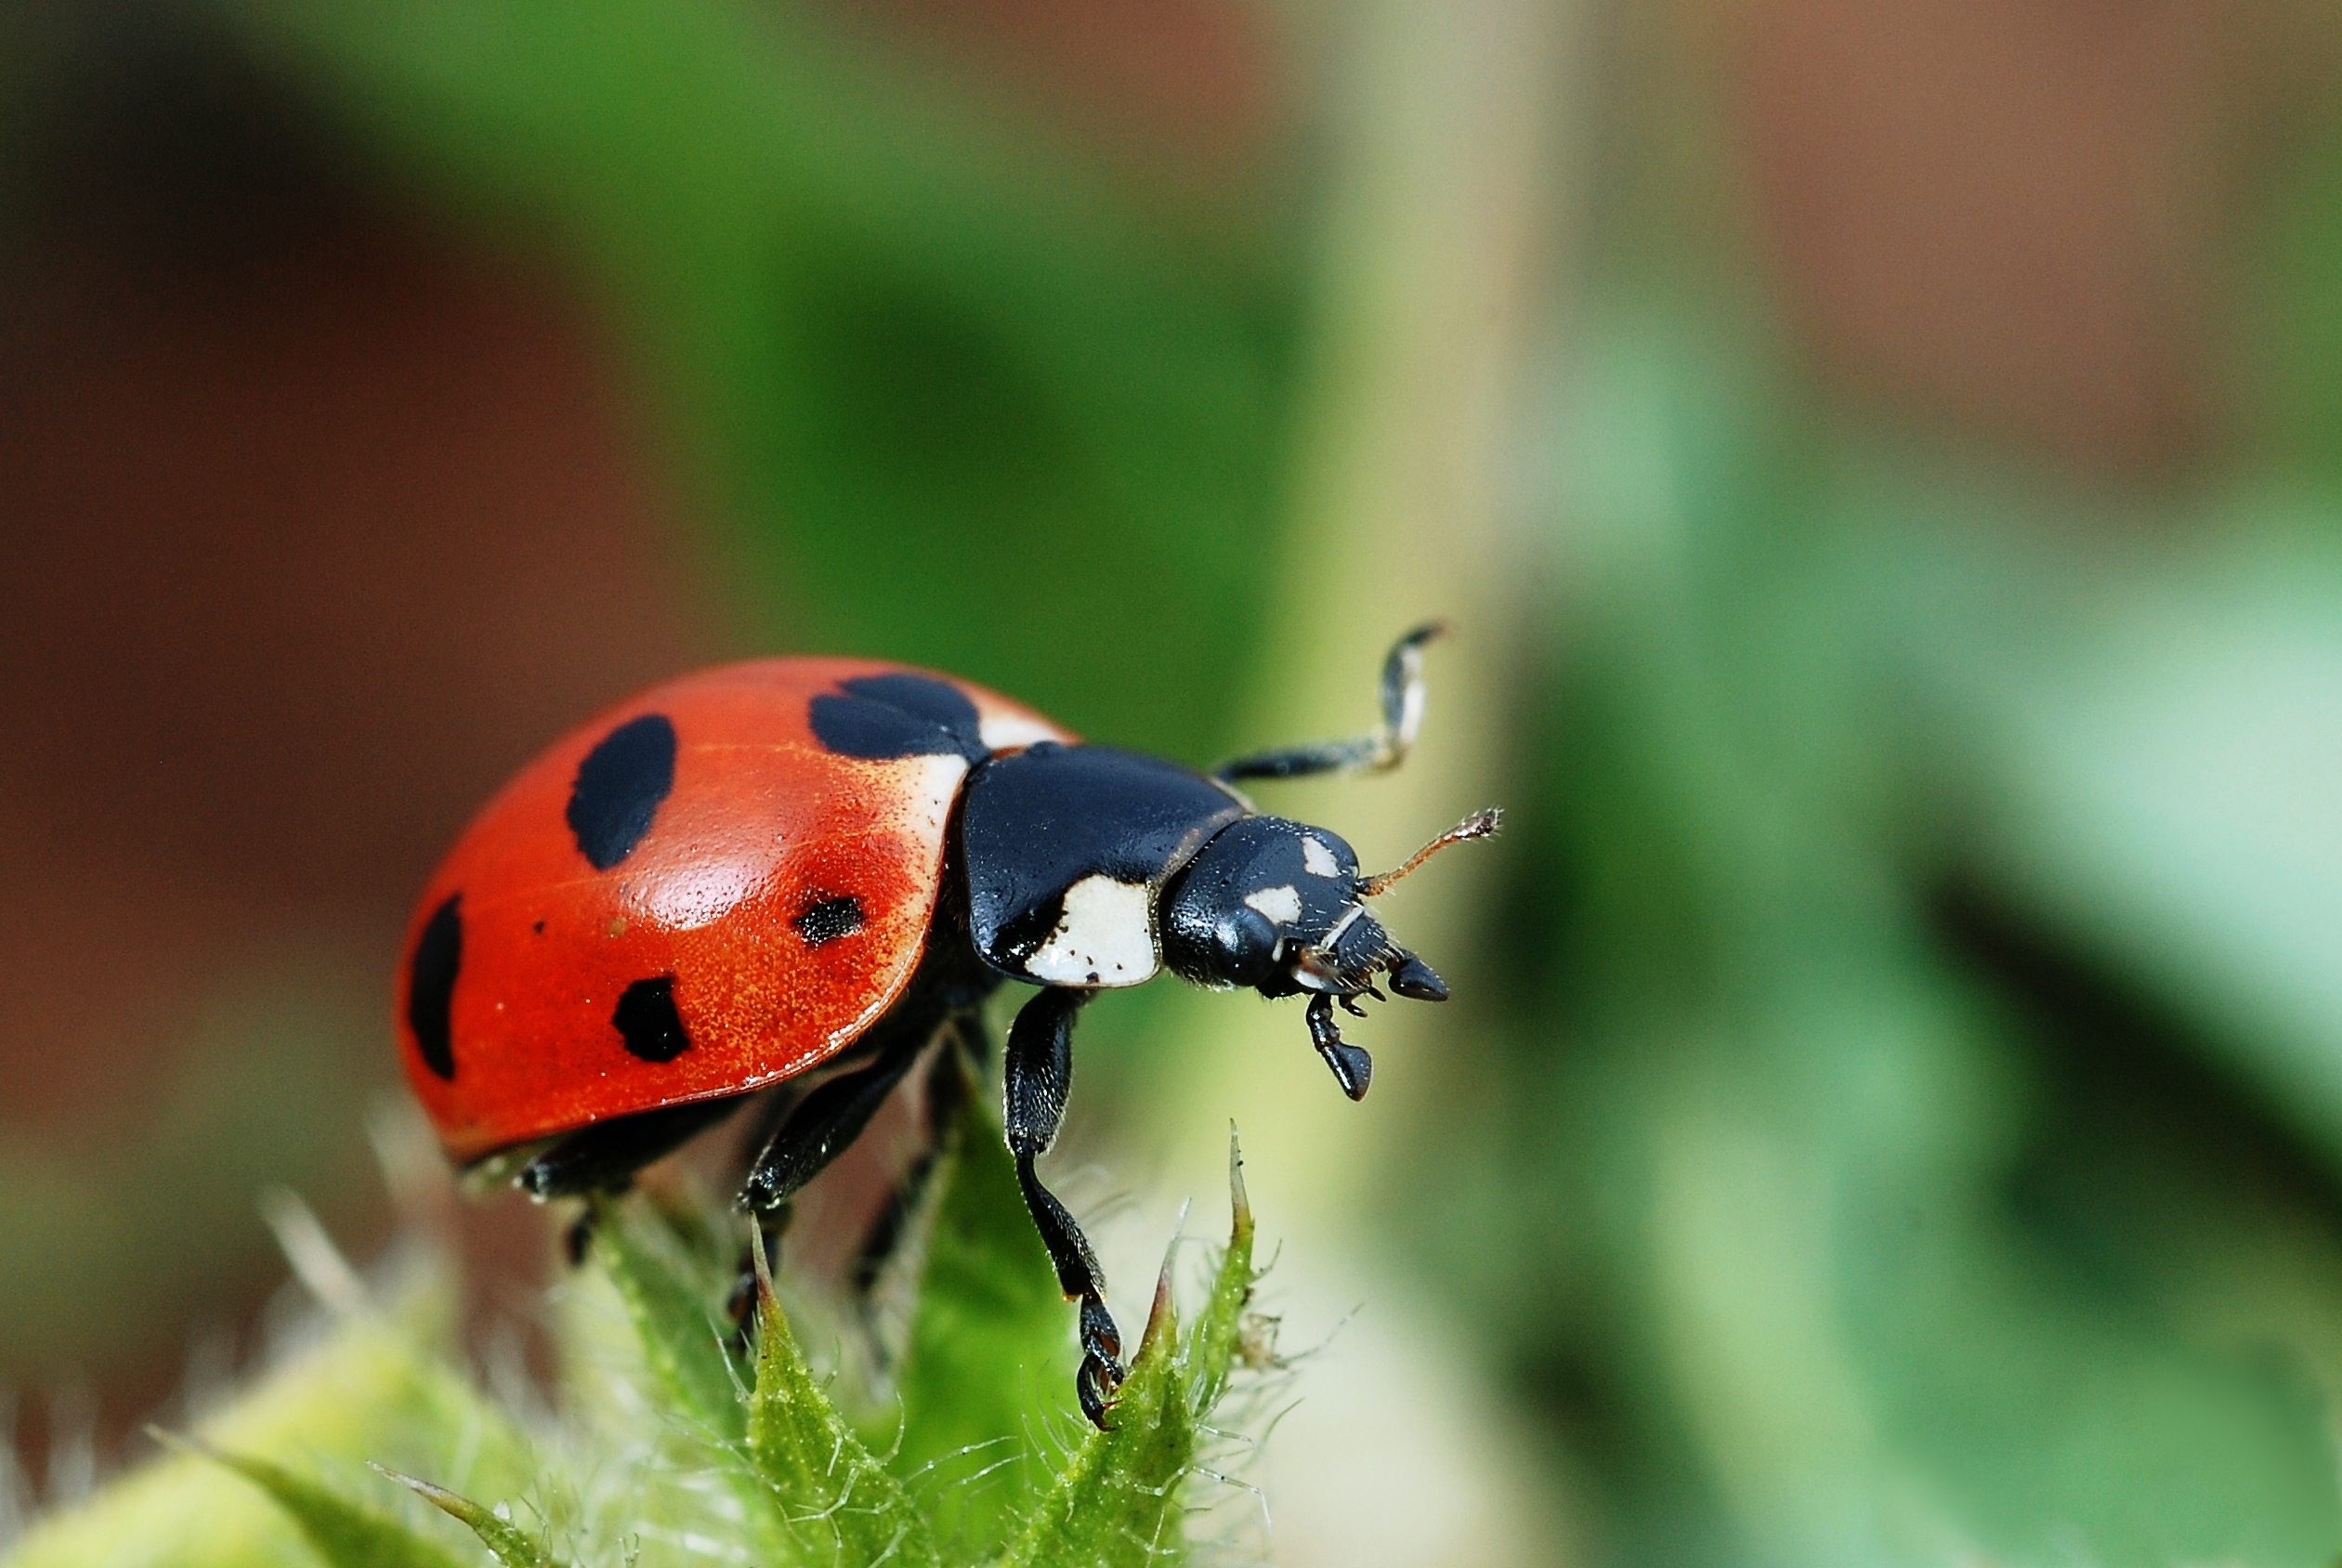 What poisonous ladybugs look like?